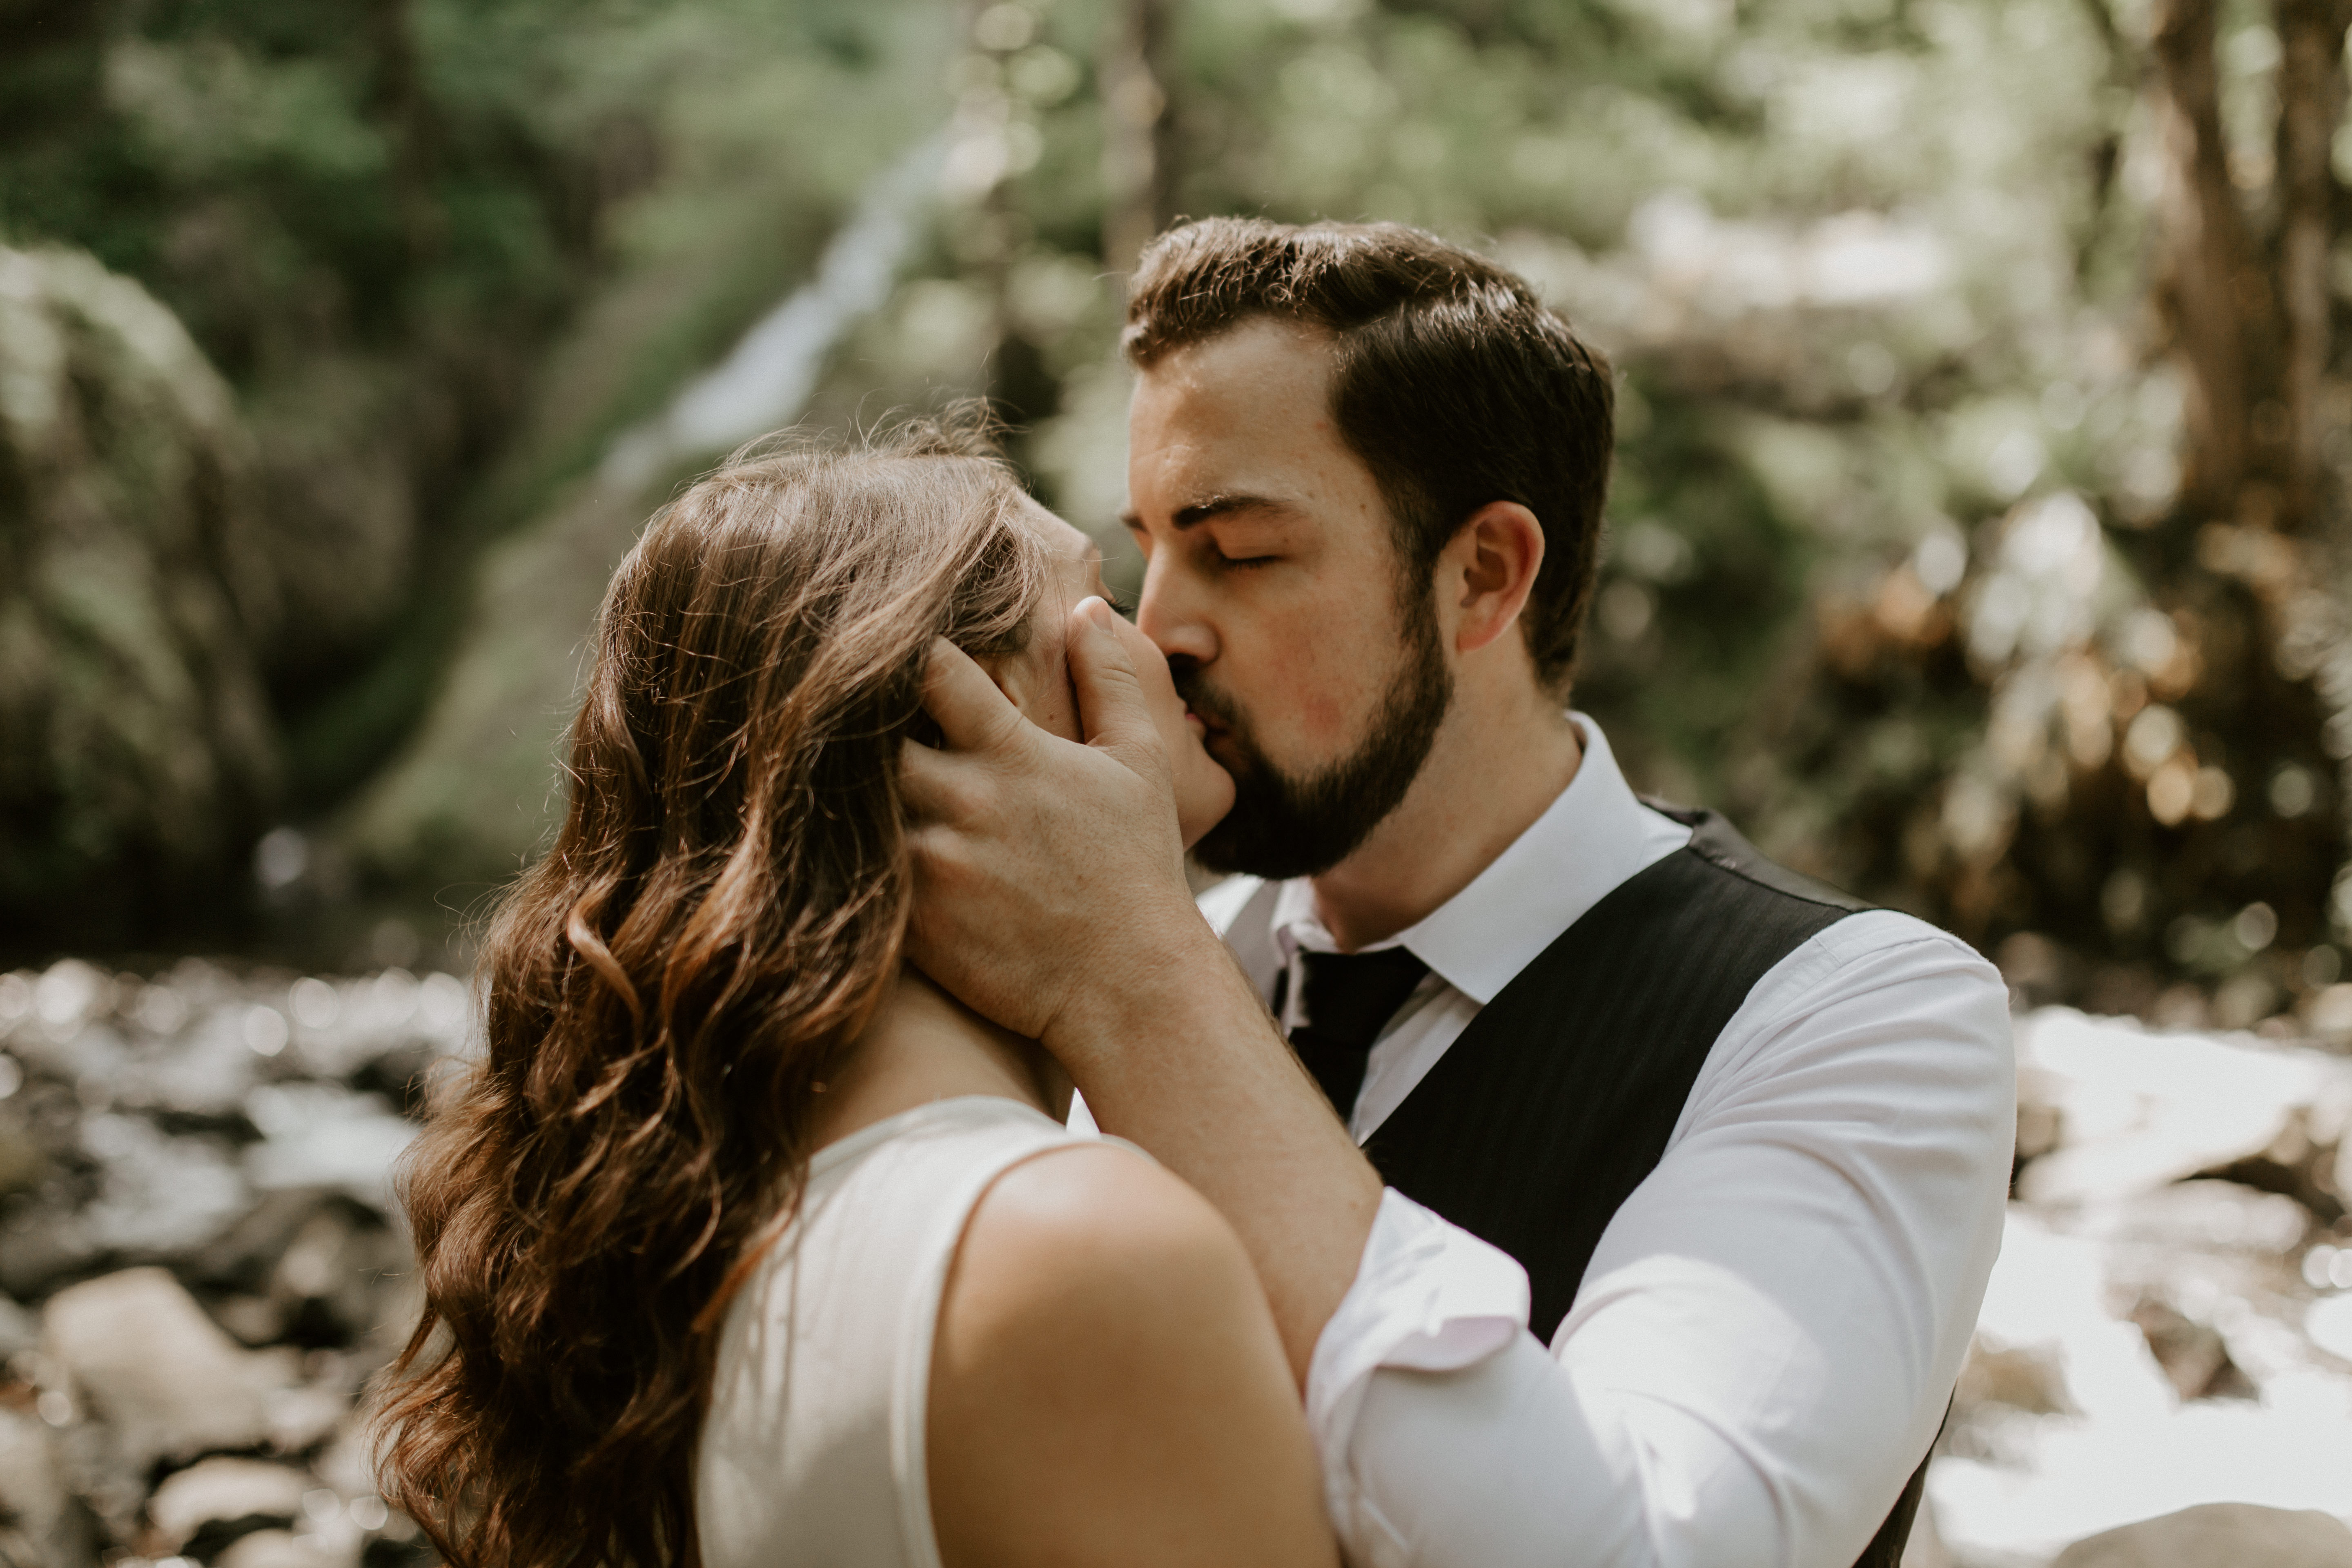 Emily and Josh kiss at Bridal Veil Falls, Oregon during their elopement. Elopement photography in Portland Oregon by Sienna Plus Josh.